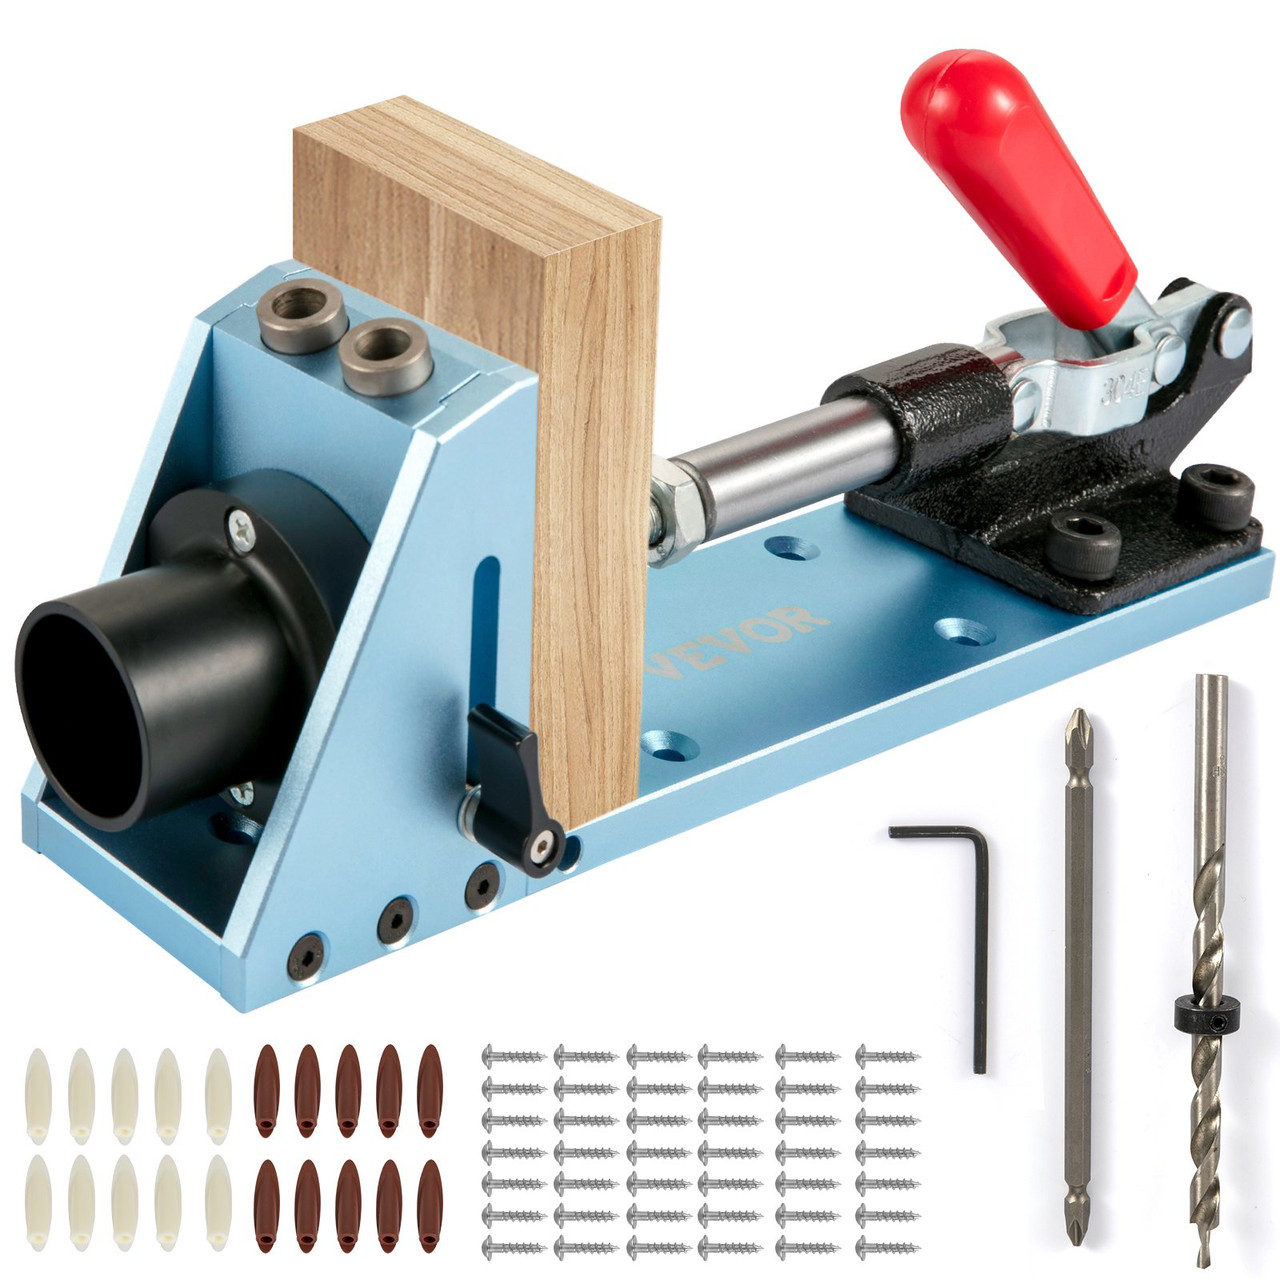 VEVOR Pocket Hole Jig Kit M4 Adjustable & Easy to Use Joinery Woodworking System Professional and Upgraded Aluminum Wood Guides Joint Angle Tool